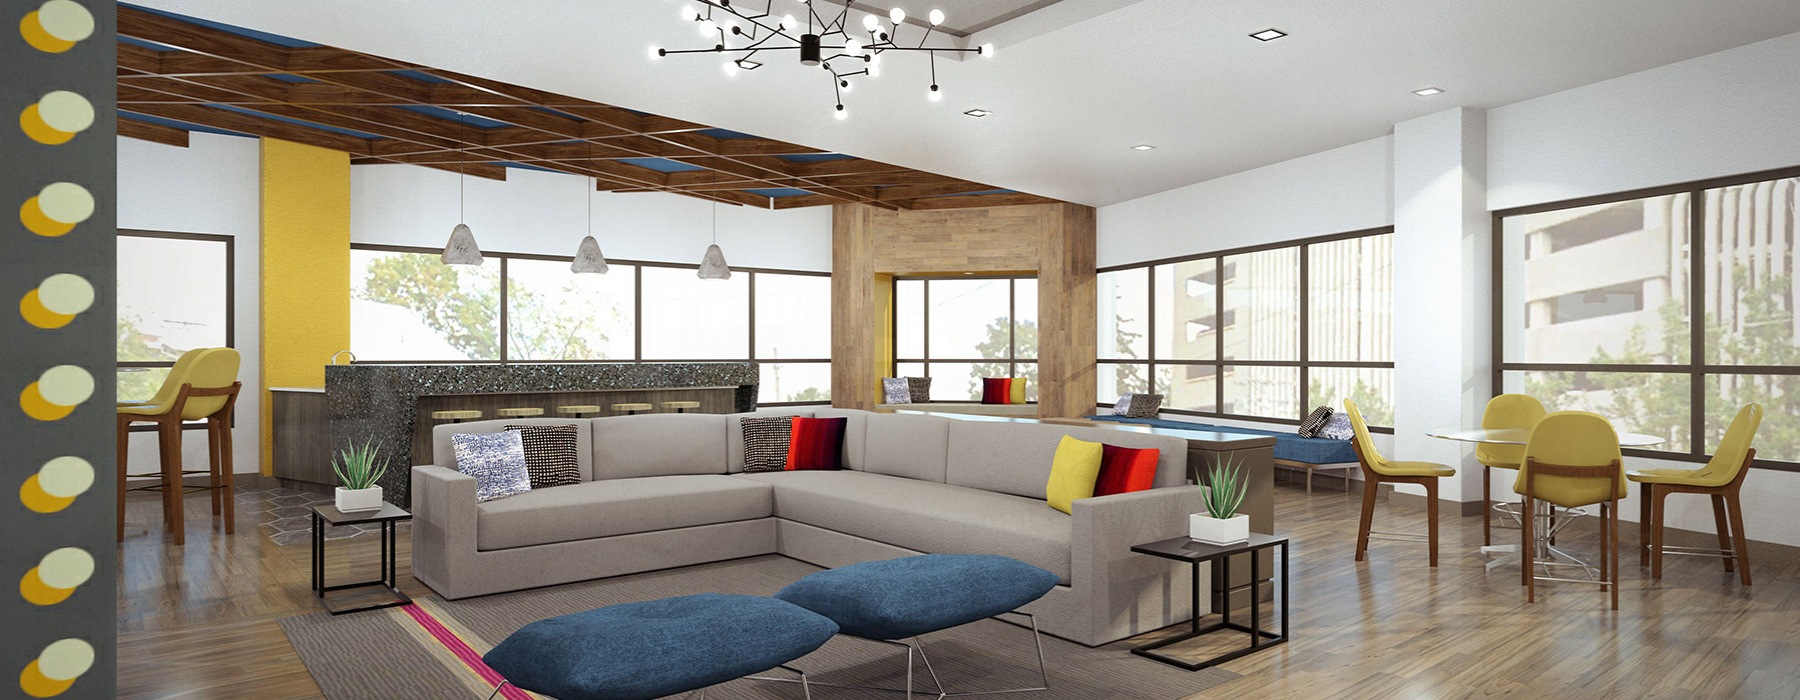 Resident Lounge with large windows